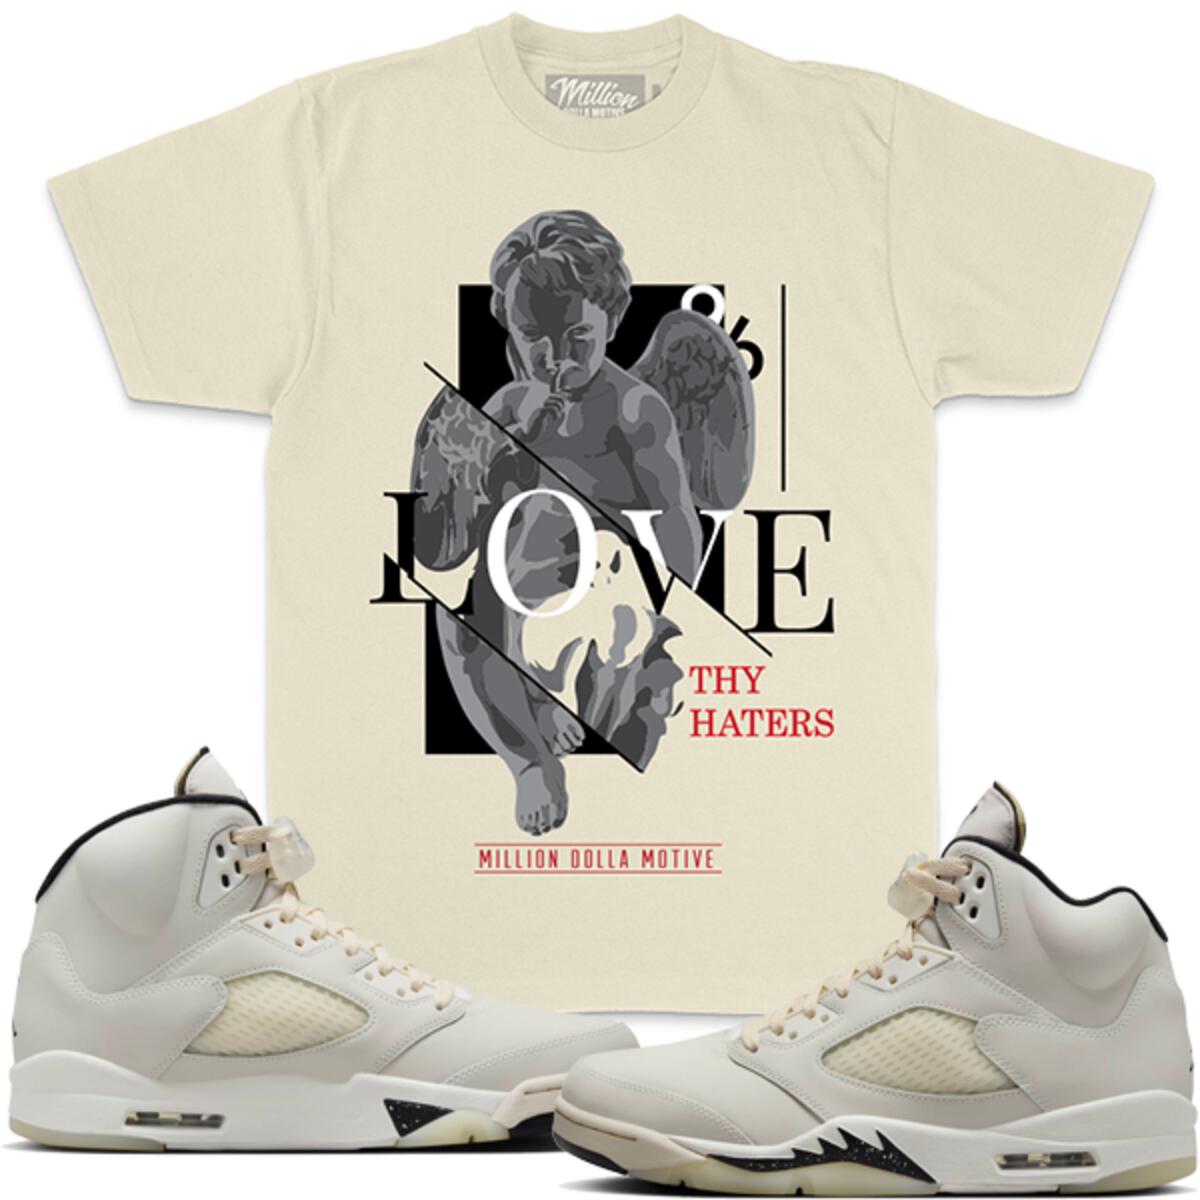 Motive love the haters T-shirt natural